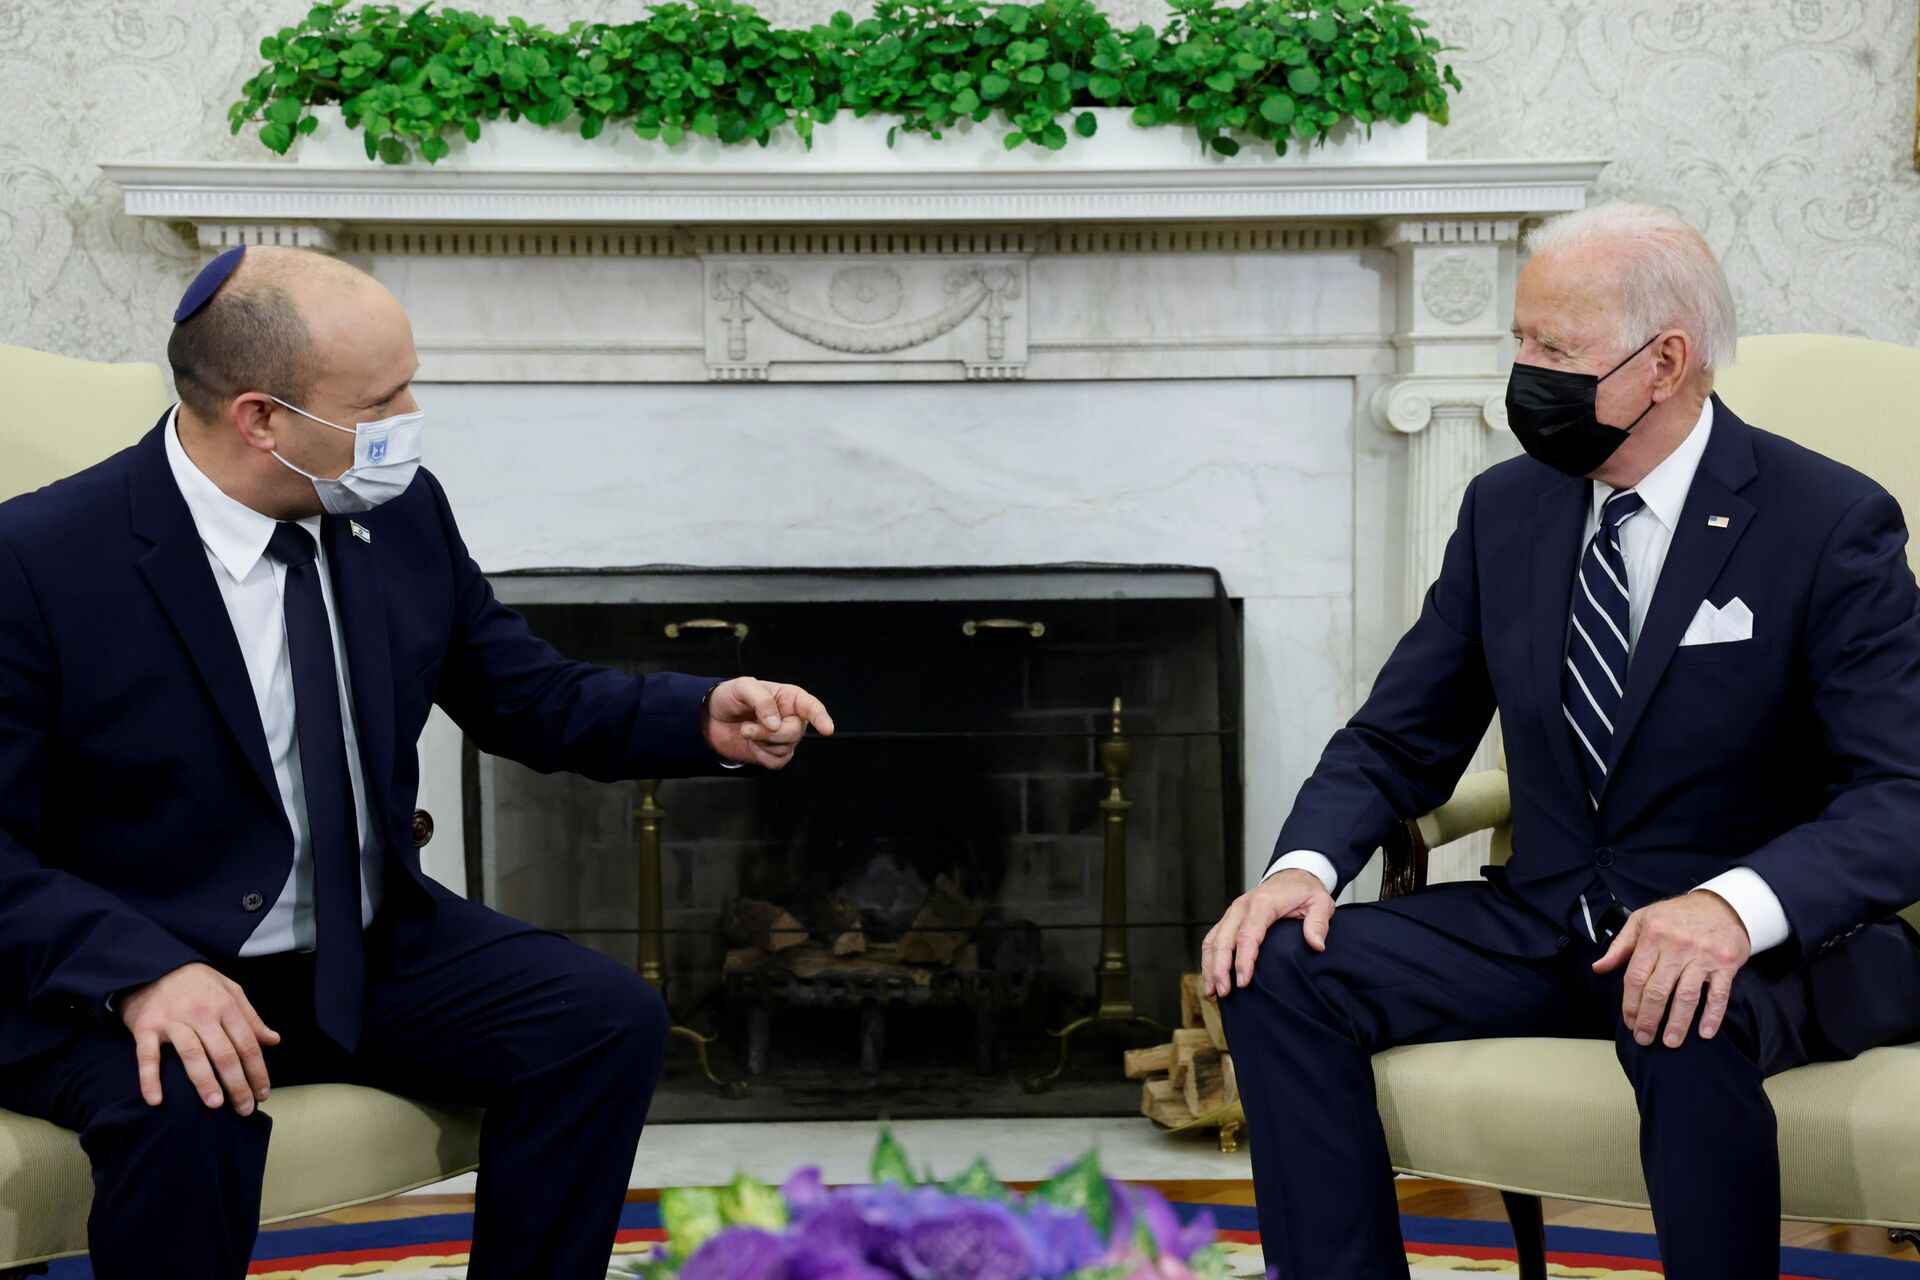 U.S. President Joe Biden and Israel's Prime Minister Naftali Bennett chat during a meeting in the Oval Office at the White House in Washington, U.S. August 27, 2021. - Sputnik International, 1920, 21.01.2022